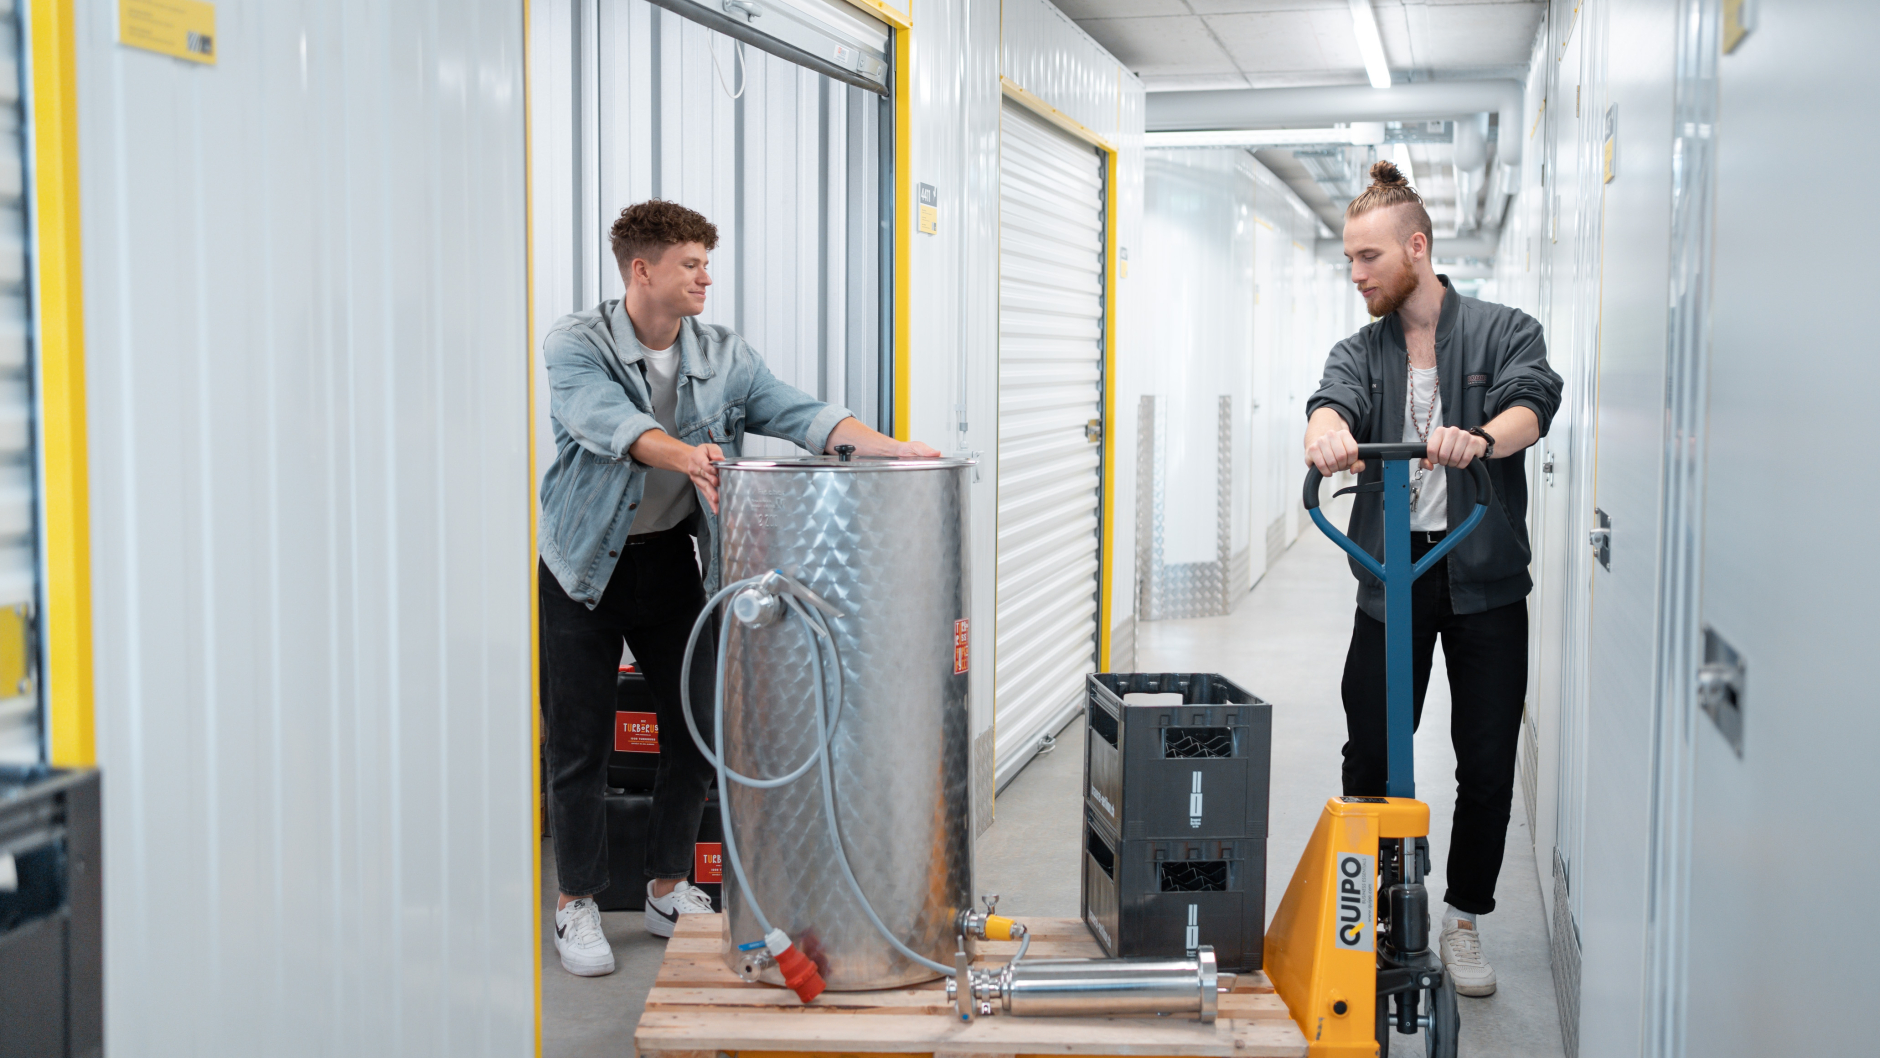 Two young start-up founders are pushing a brewing kettle on a pallet trolley into the storage unit at Zebrabox.